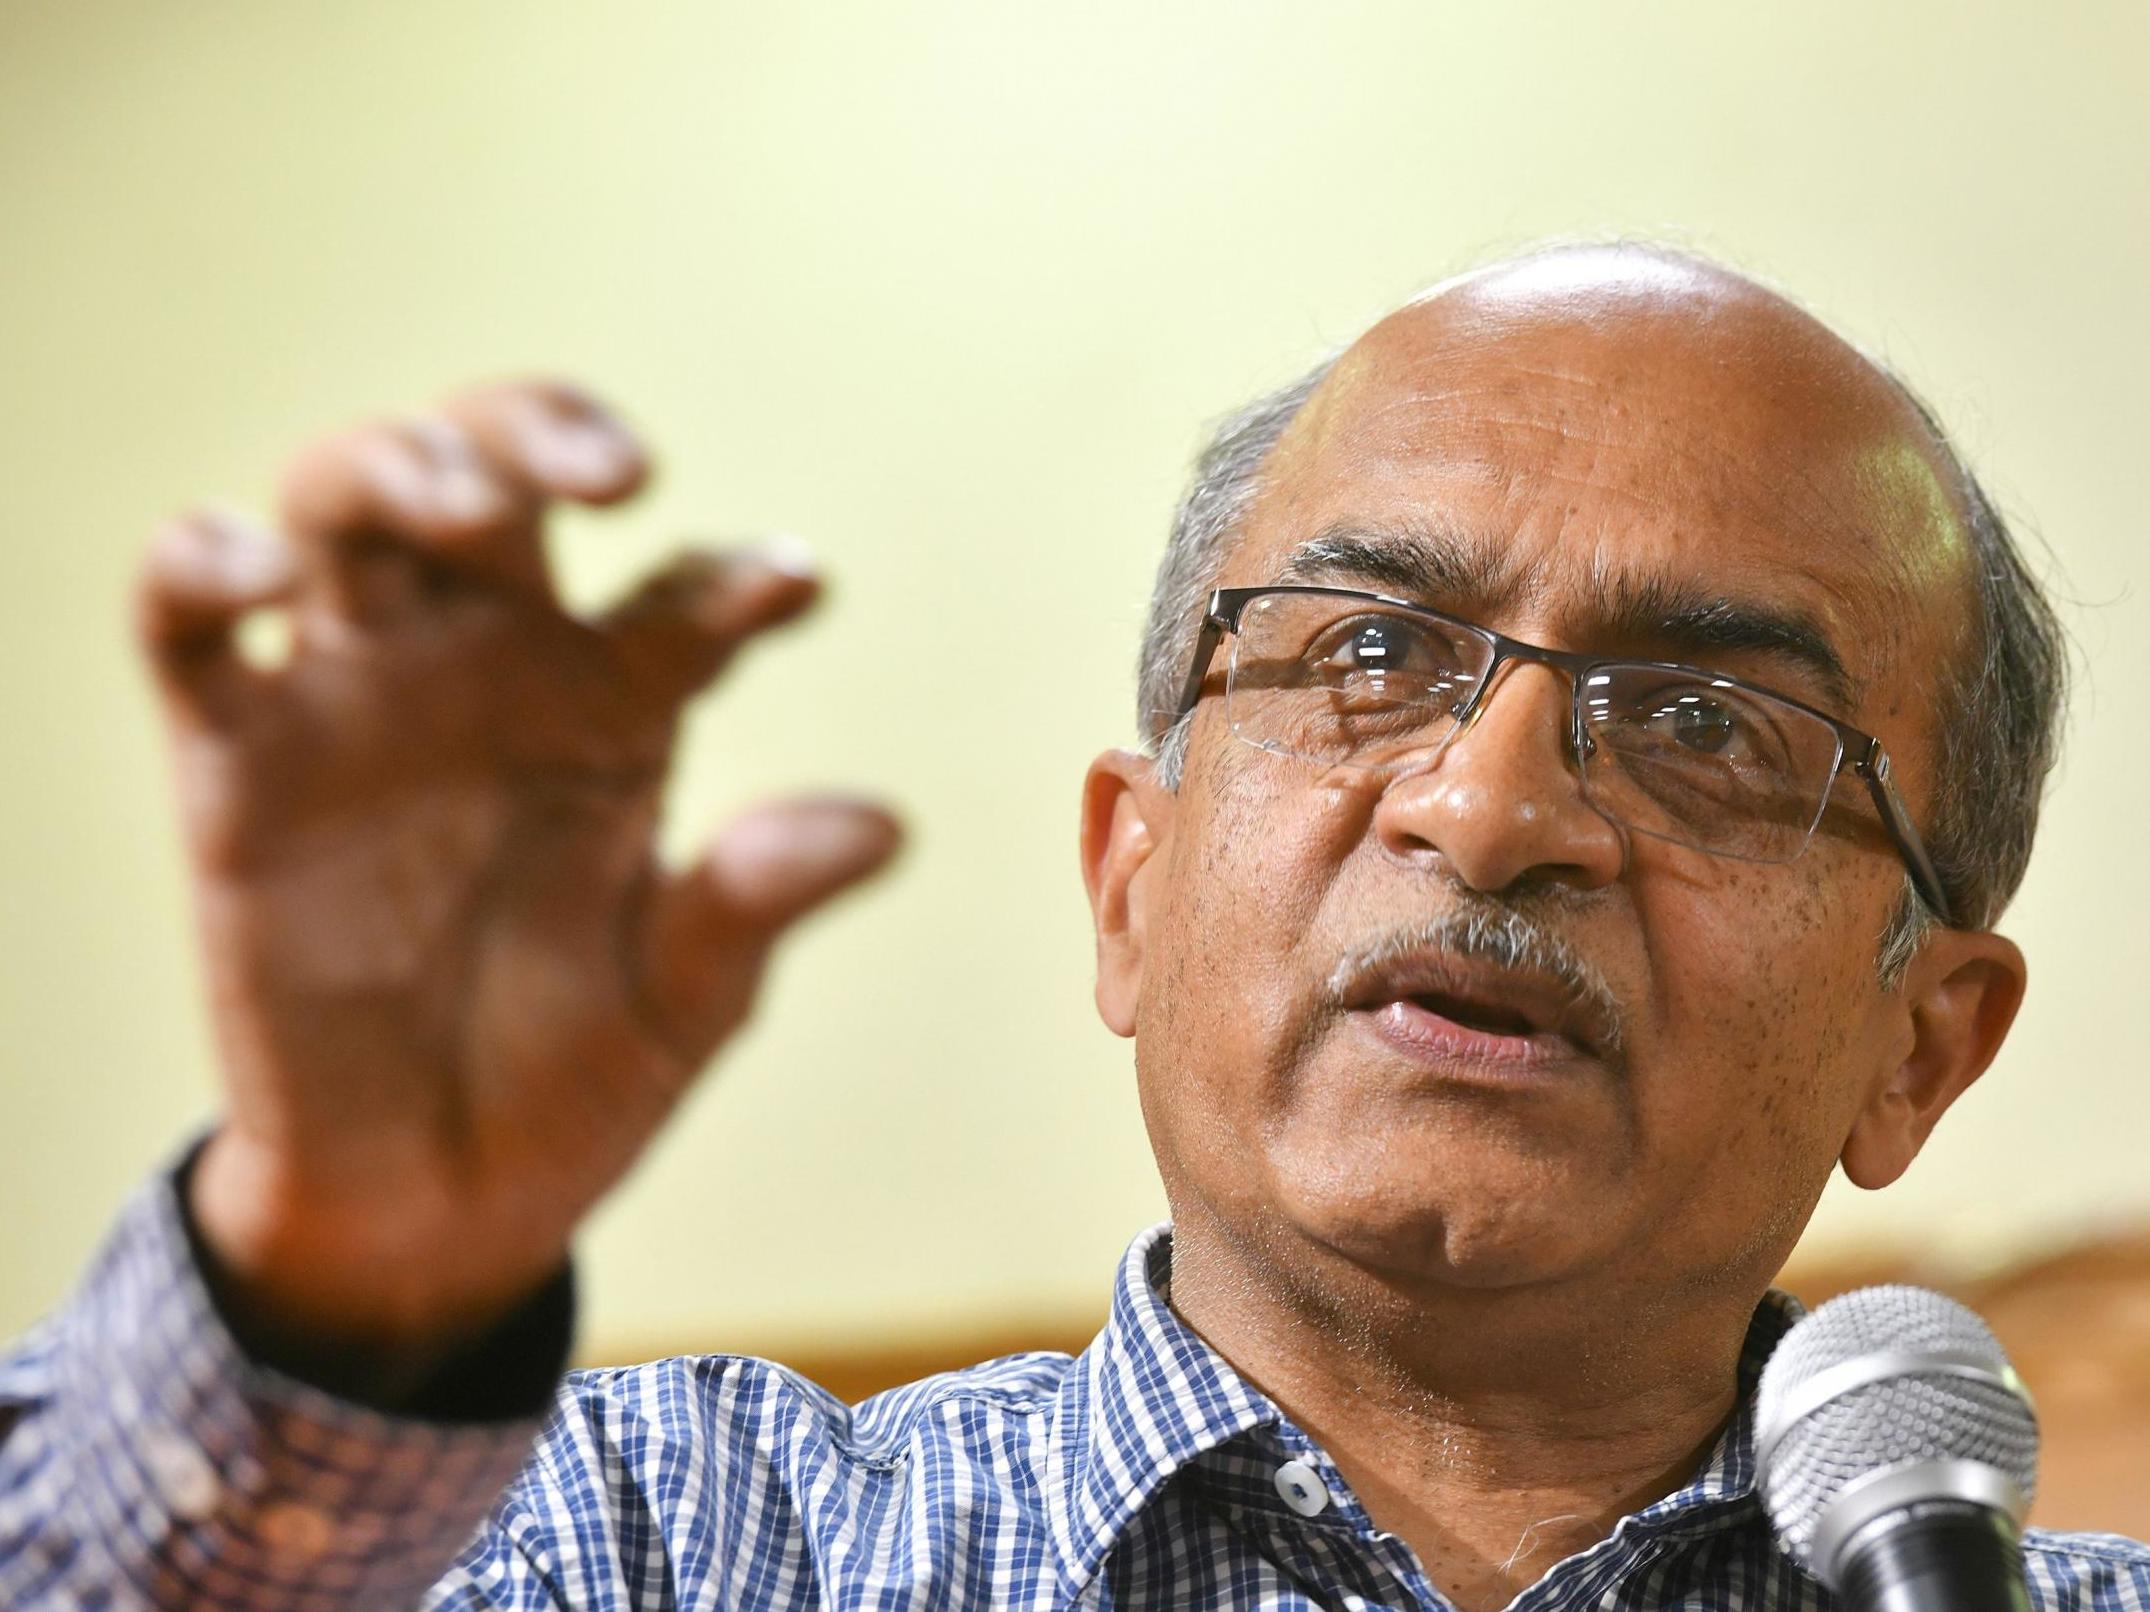 Activist Prashant Bhushan was convicted of contempt after critical tweets against the Supreme Court